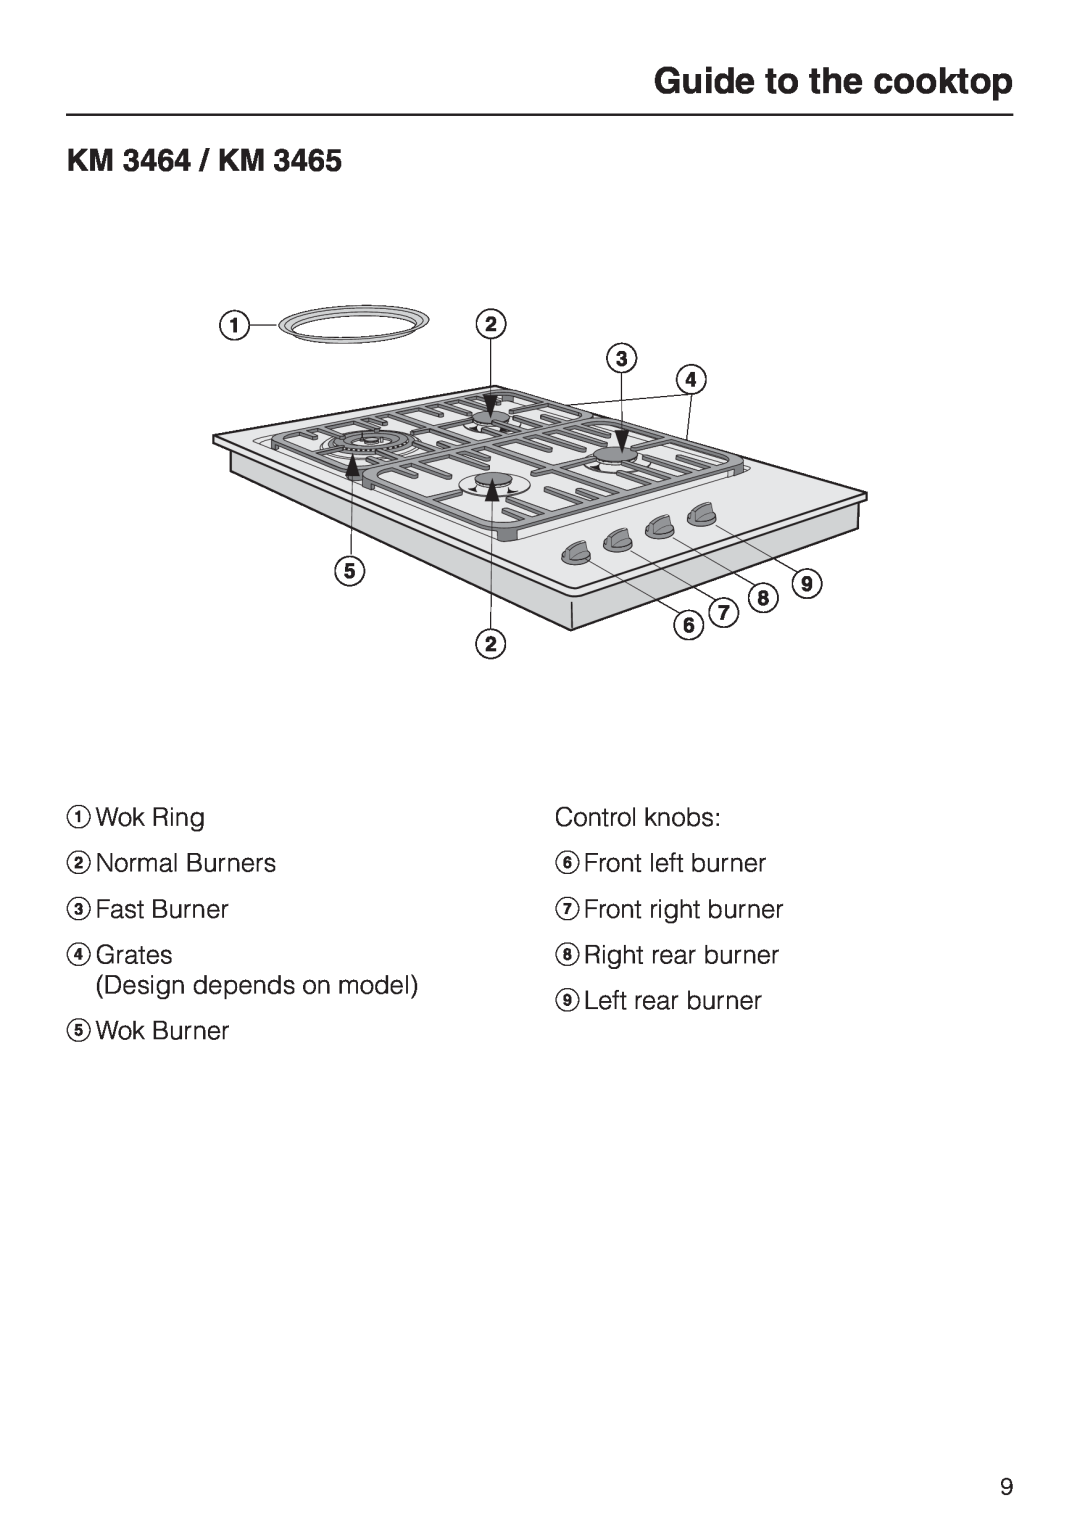 Miele KM 3475, KM 3465 installation instructions Guide to the cooktop, KM 3464 / KM 